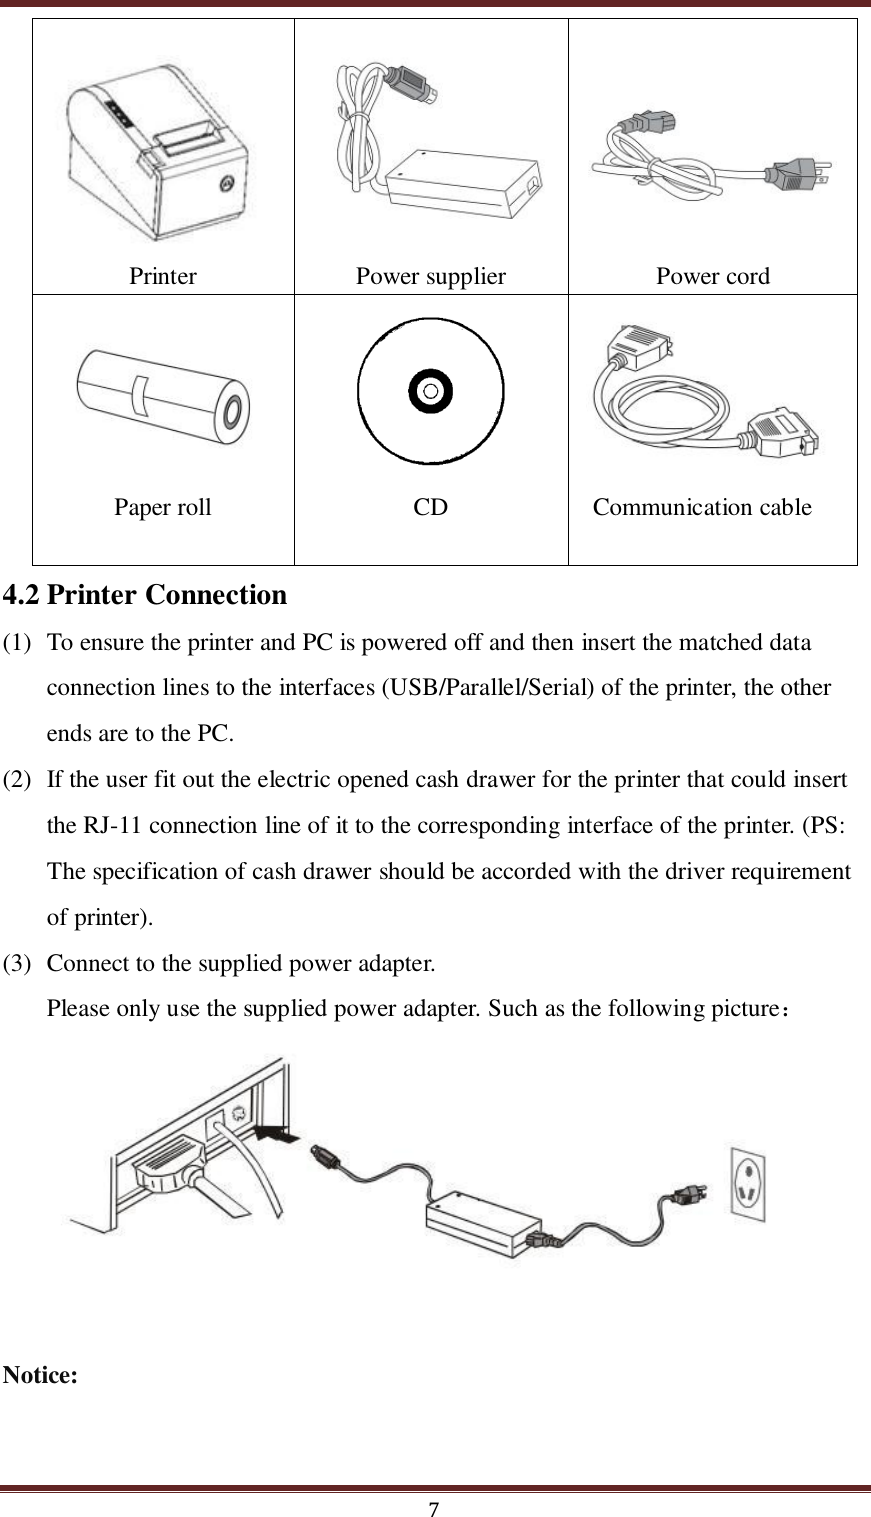  7  Printer        Power supplier      Power cord     Paper roll     CD     Communication cable 4.2 Printer Connection (1) To ensure the printer and PC is powered off and then insert the matched data connection lines to the interfaces (USB/Parallel/Serial) of the printer, the other ends are to the PC.   (2) If the user fit out the electric opened cash drawer for the printer that could insert the RJ-11 connection line of it to the corresponding interface of the printer. (PS: The specification of cash drawer should be accorded with the driver requirement of printer). (3) Connect to the supplied power adapter. Please only use the supplied power adapter. Such as the following picture：        Notice: 